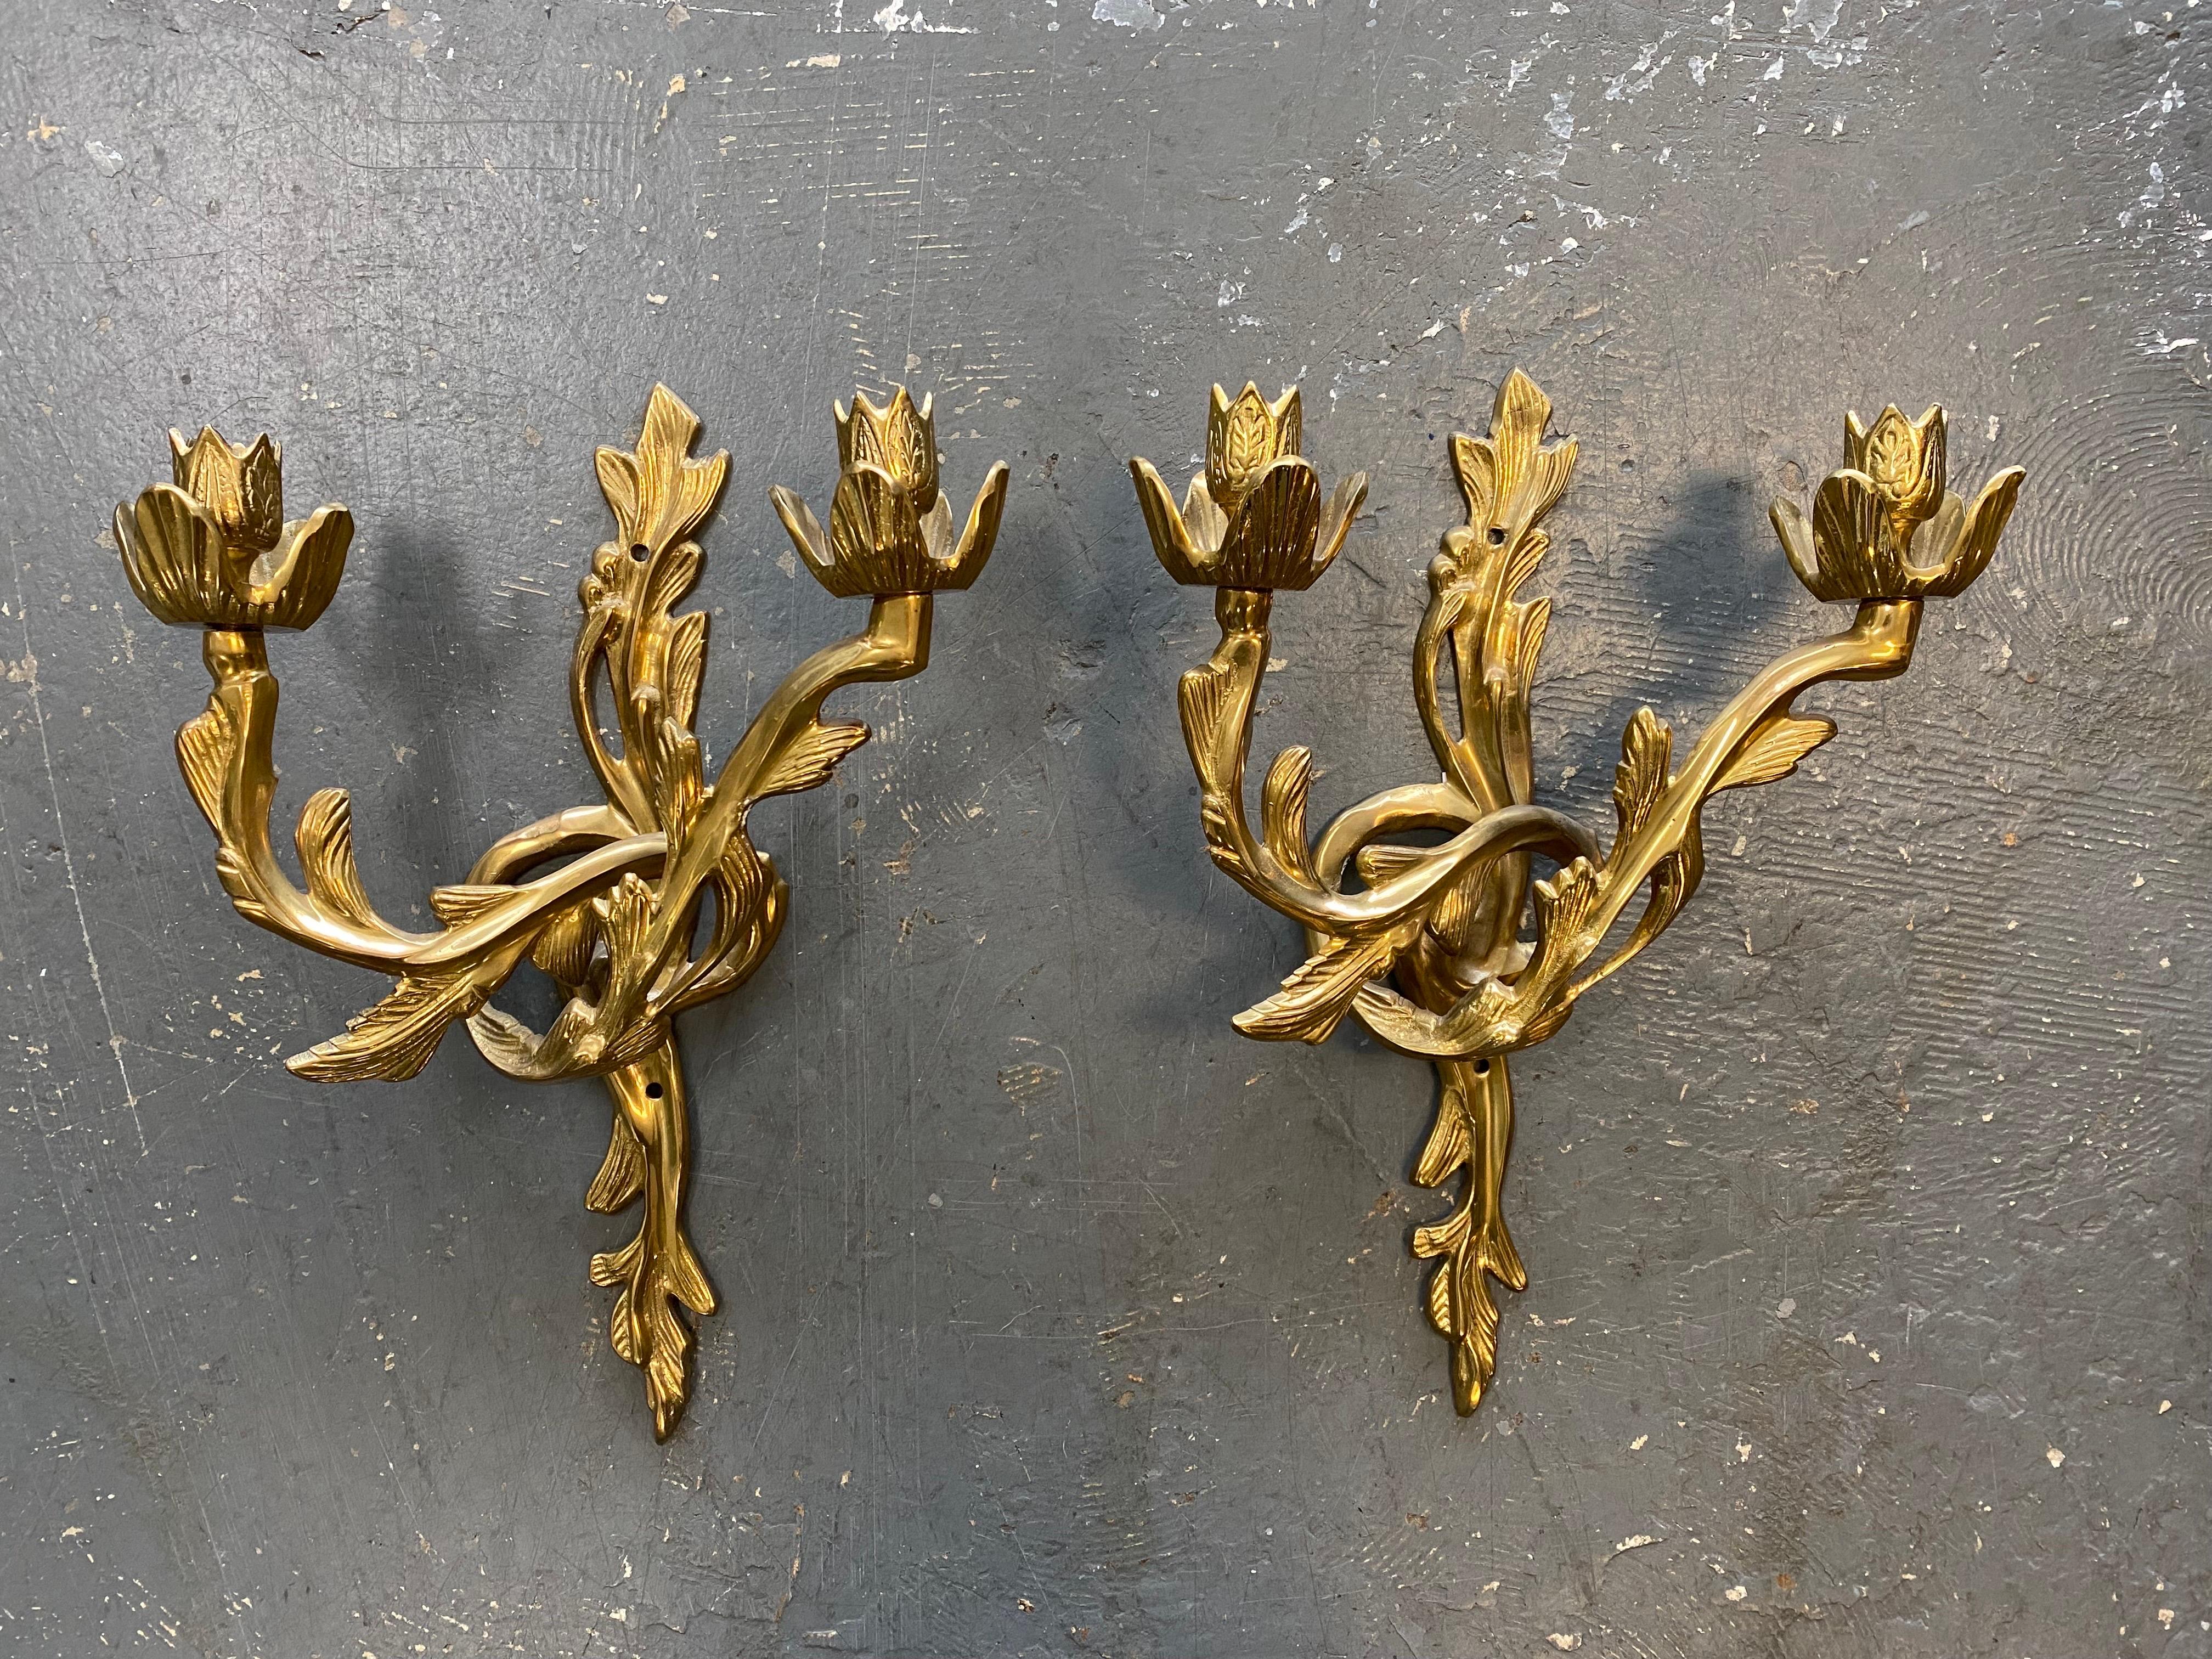 Beautiful pair of Hollywood regency solid brass wall sconce candleholders. The pair, with 2 candleholders each, is in excellent condition with barely any signs of wear.

Designer Rochelle Greayer once said of Hollywood Regency: 